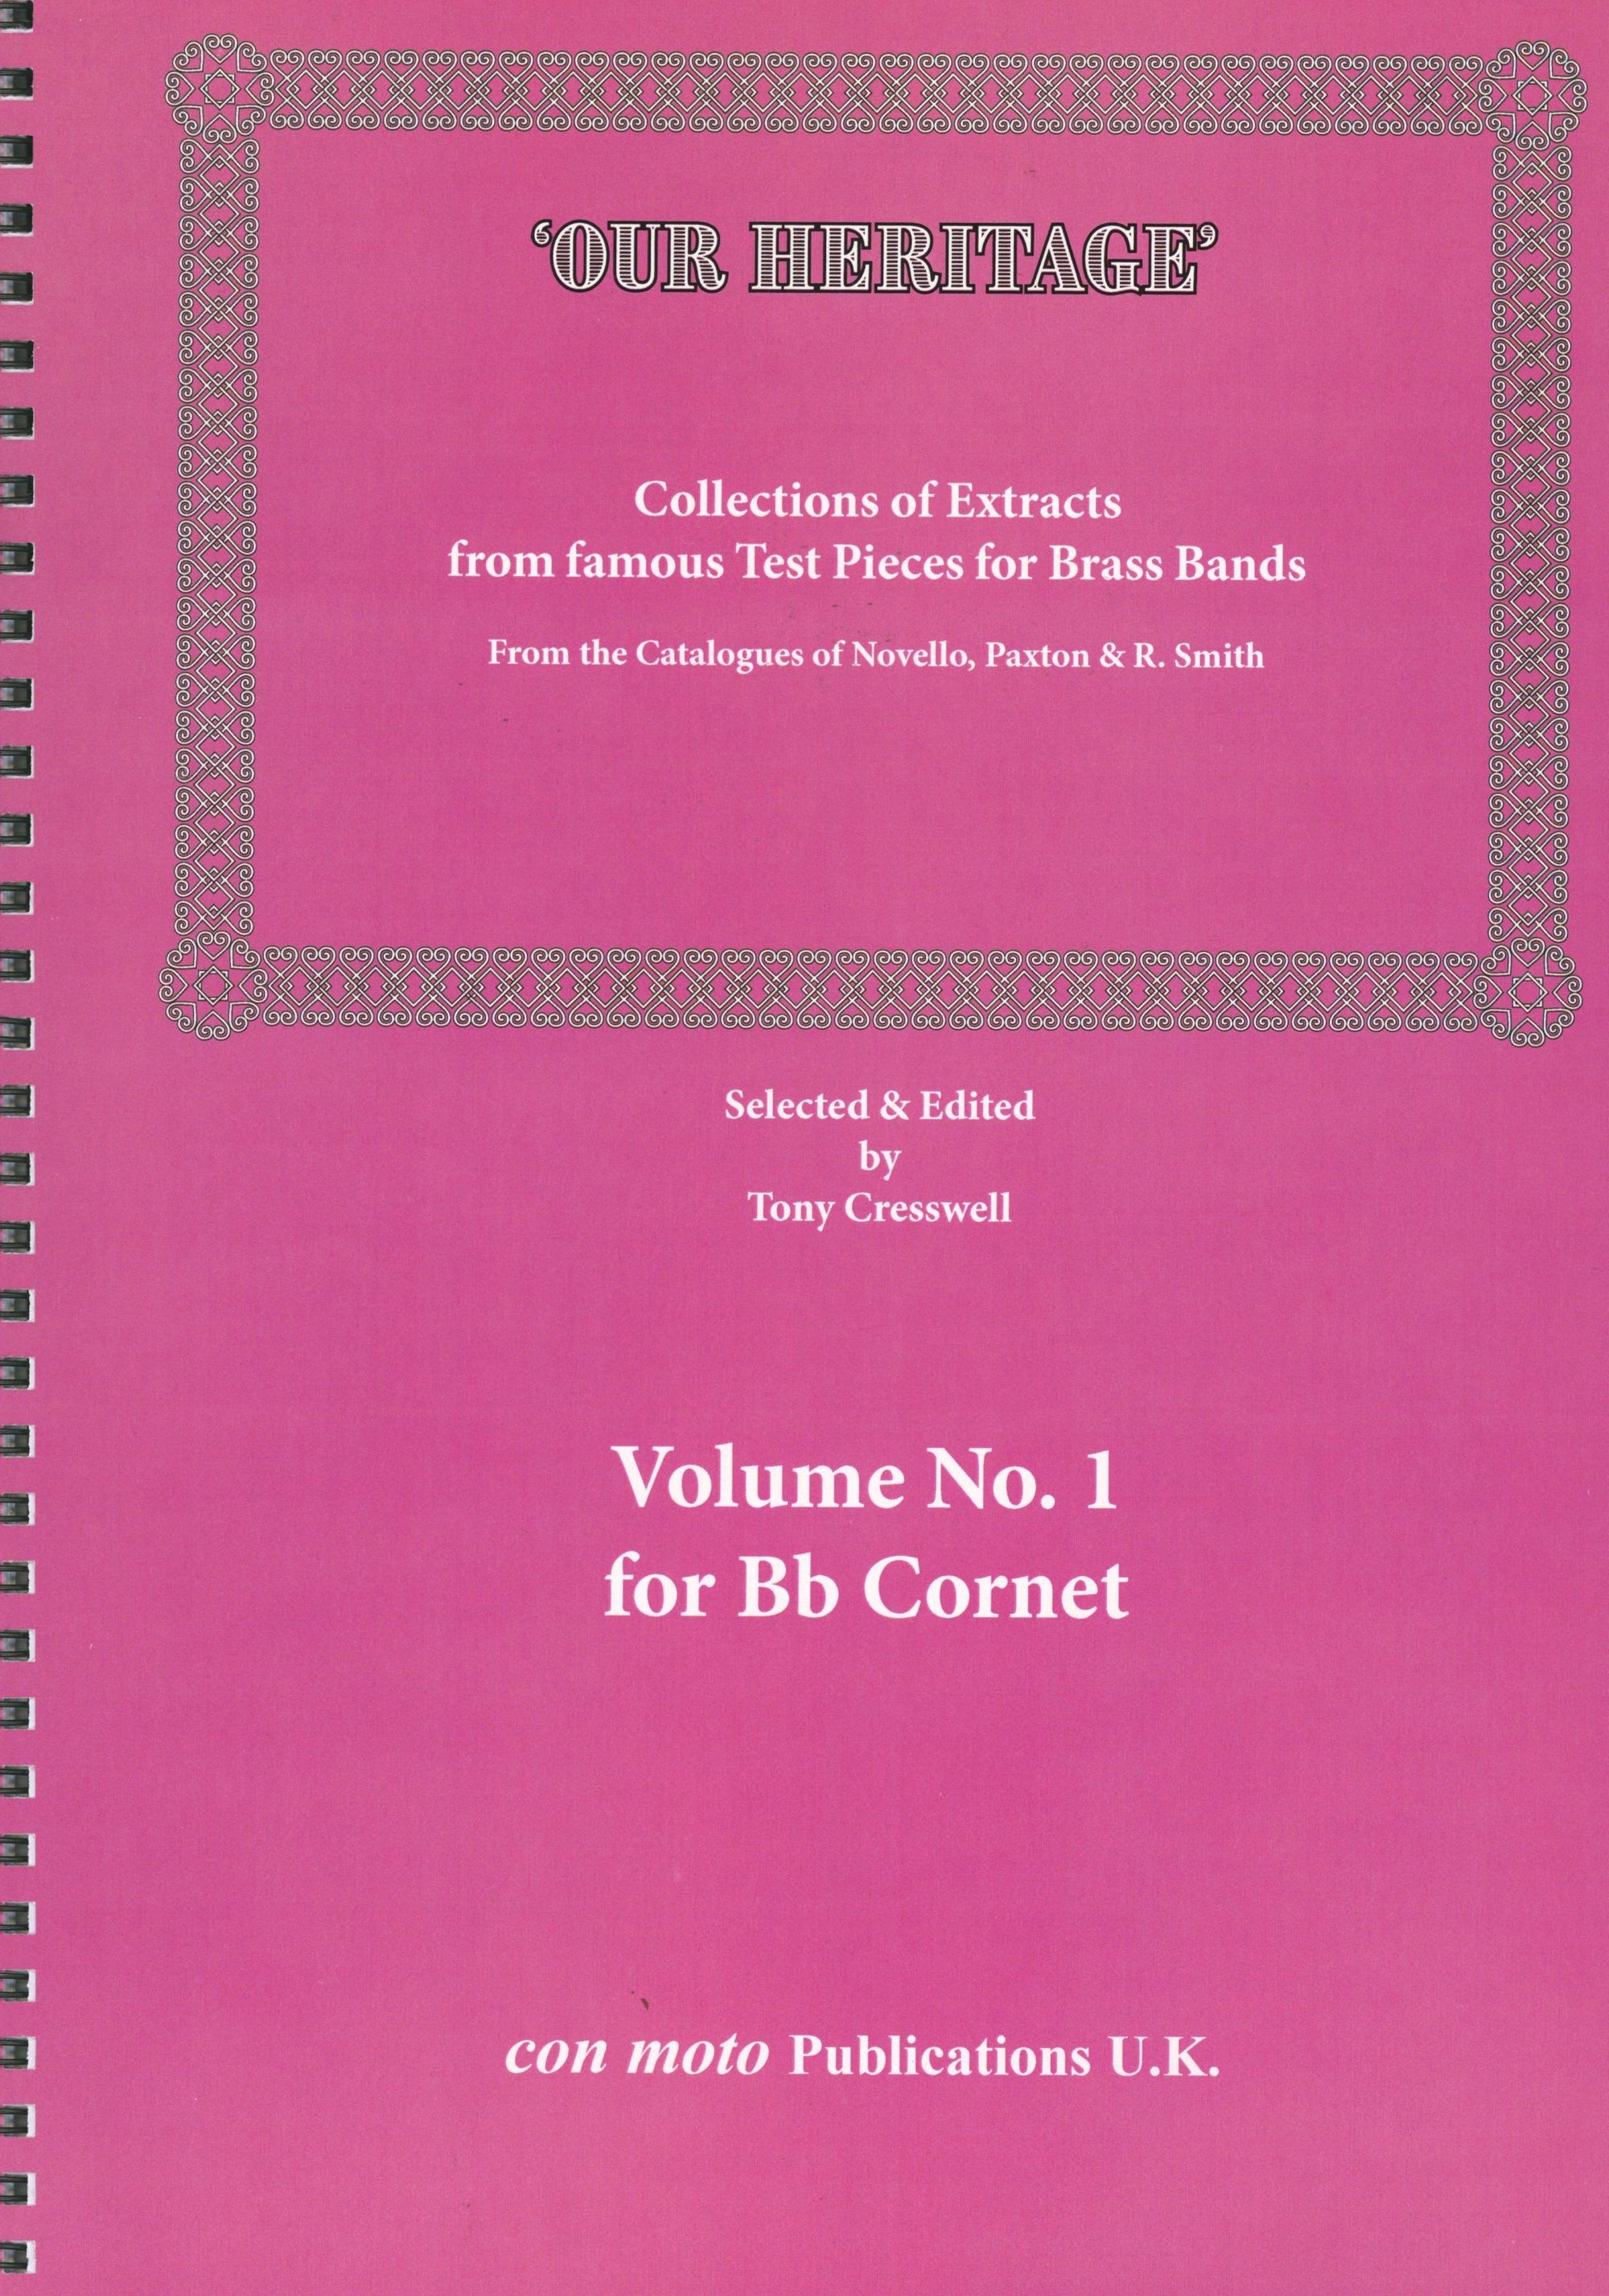 Our Heritage - Volume 1 for B-flat Cornet